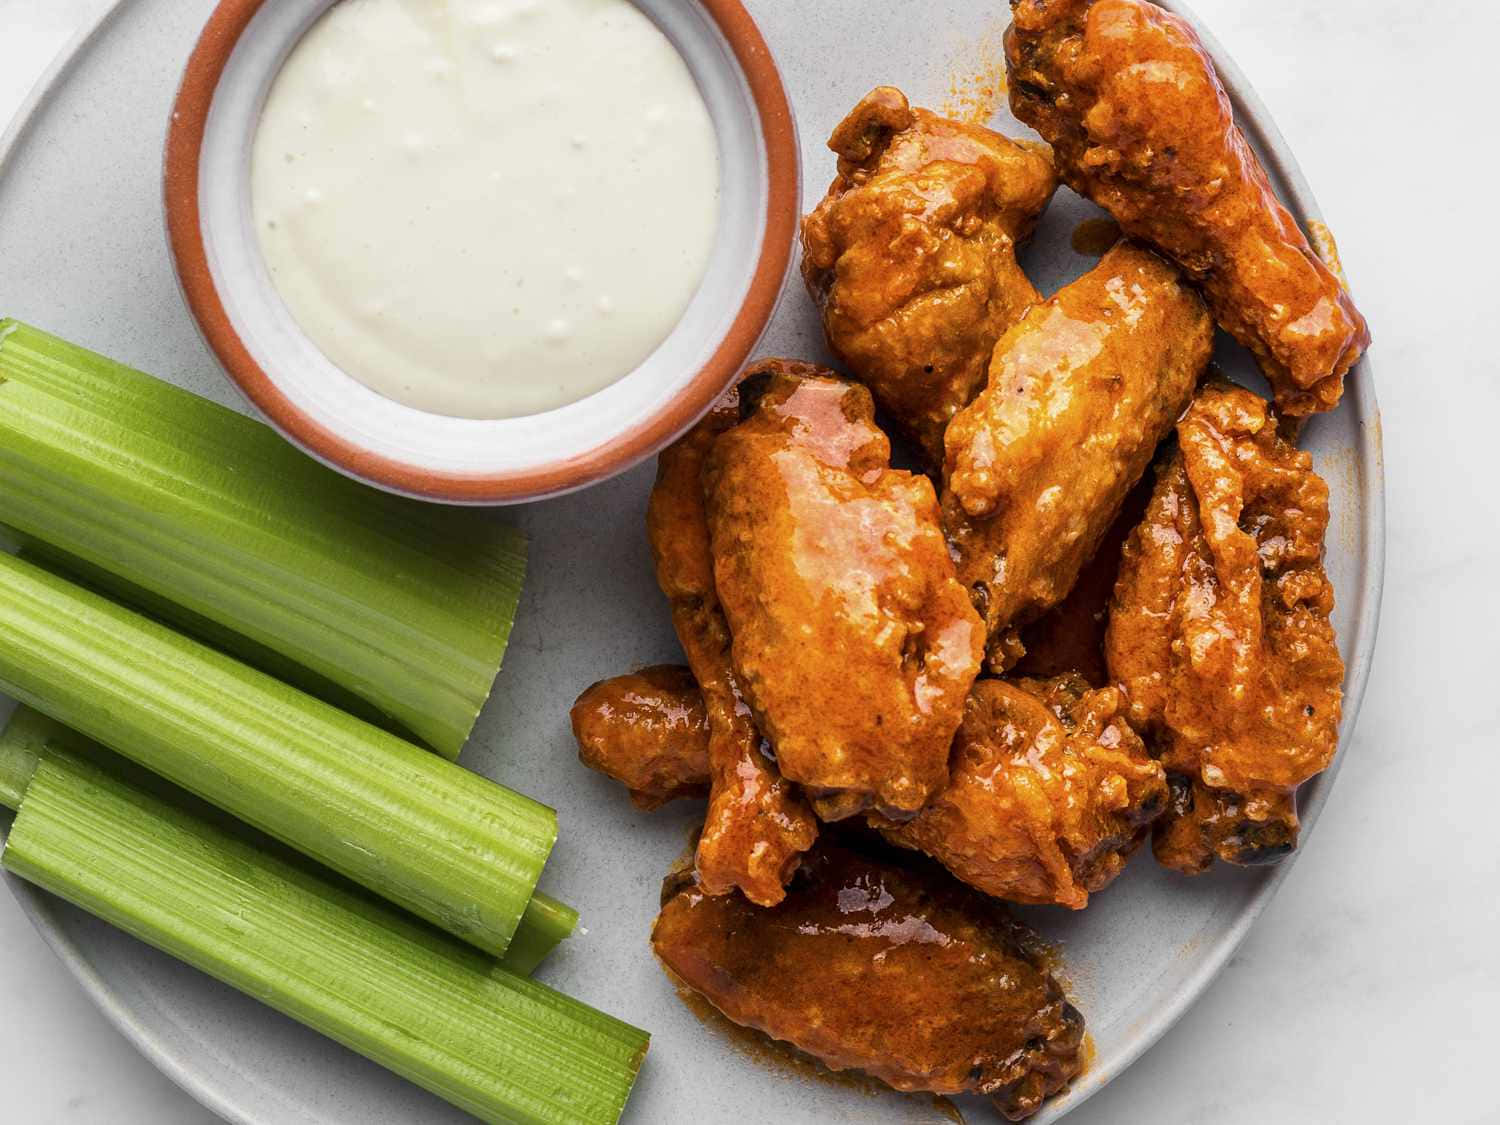 Enjoy delicious Buffalo Wild Wings at the nearest location today